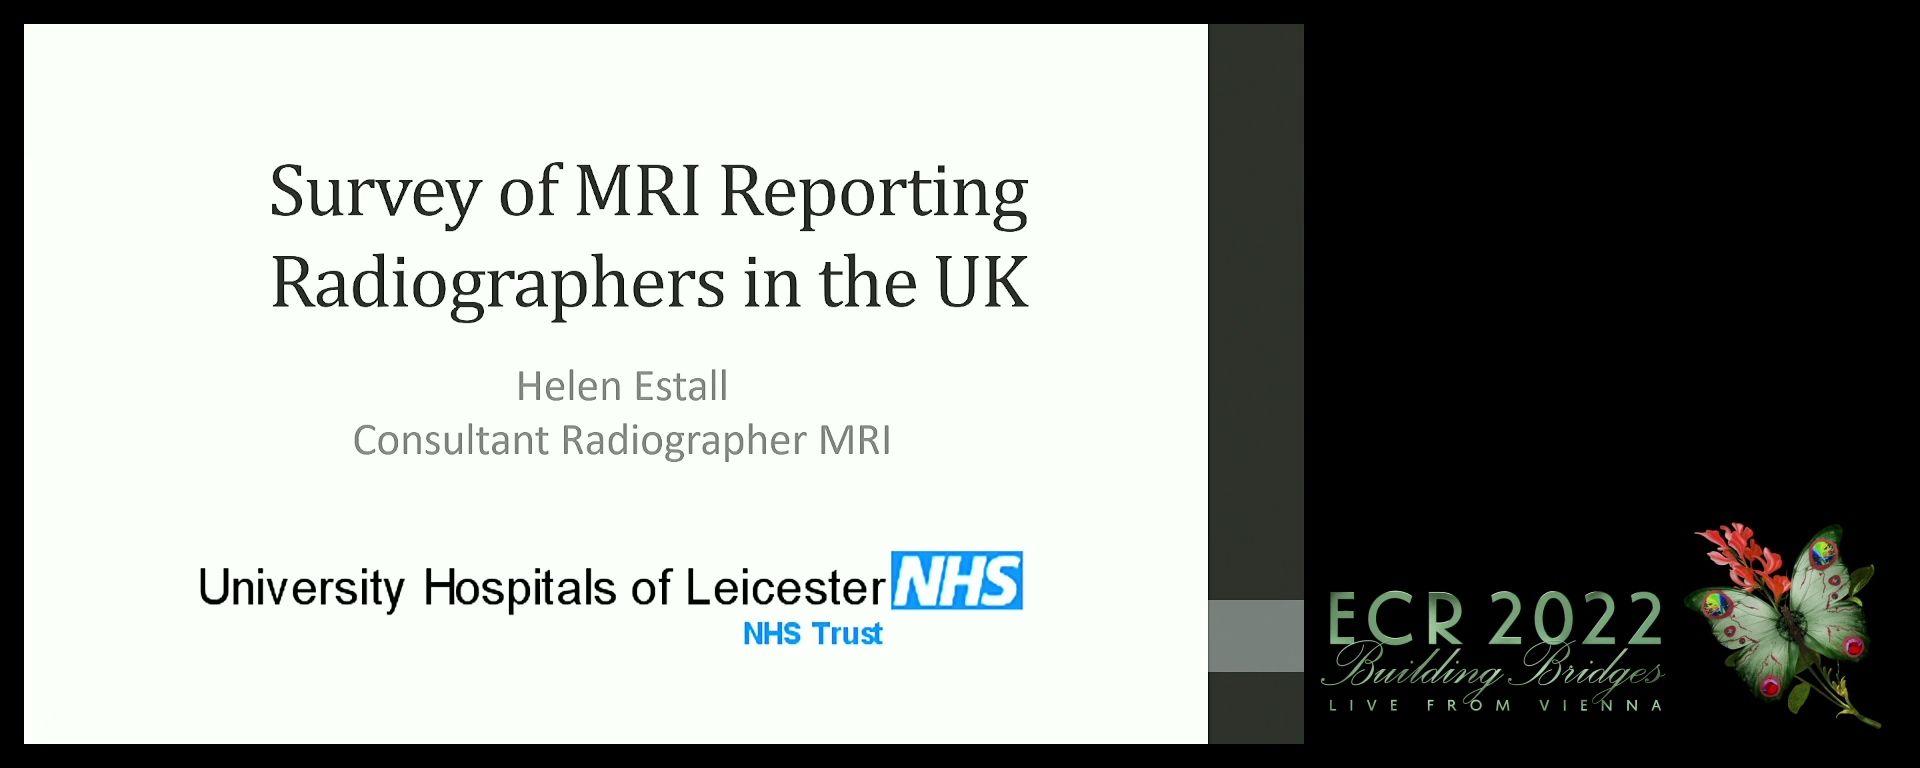 Results of a survey on MRI reporting radiographers in the UK - Helen Estall, Leicester / UK